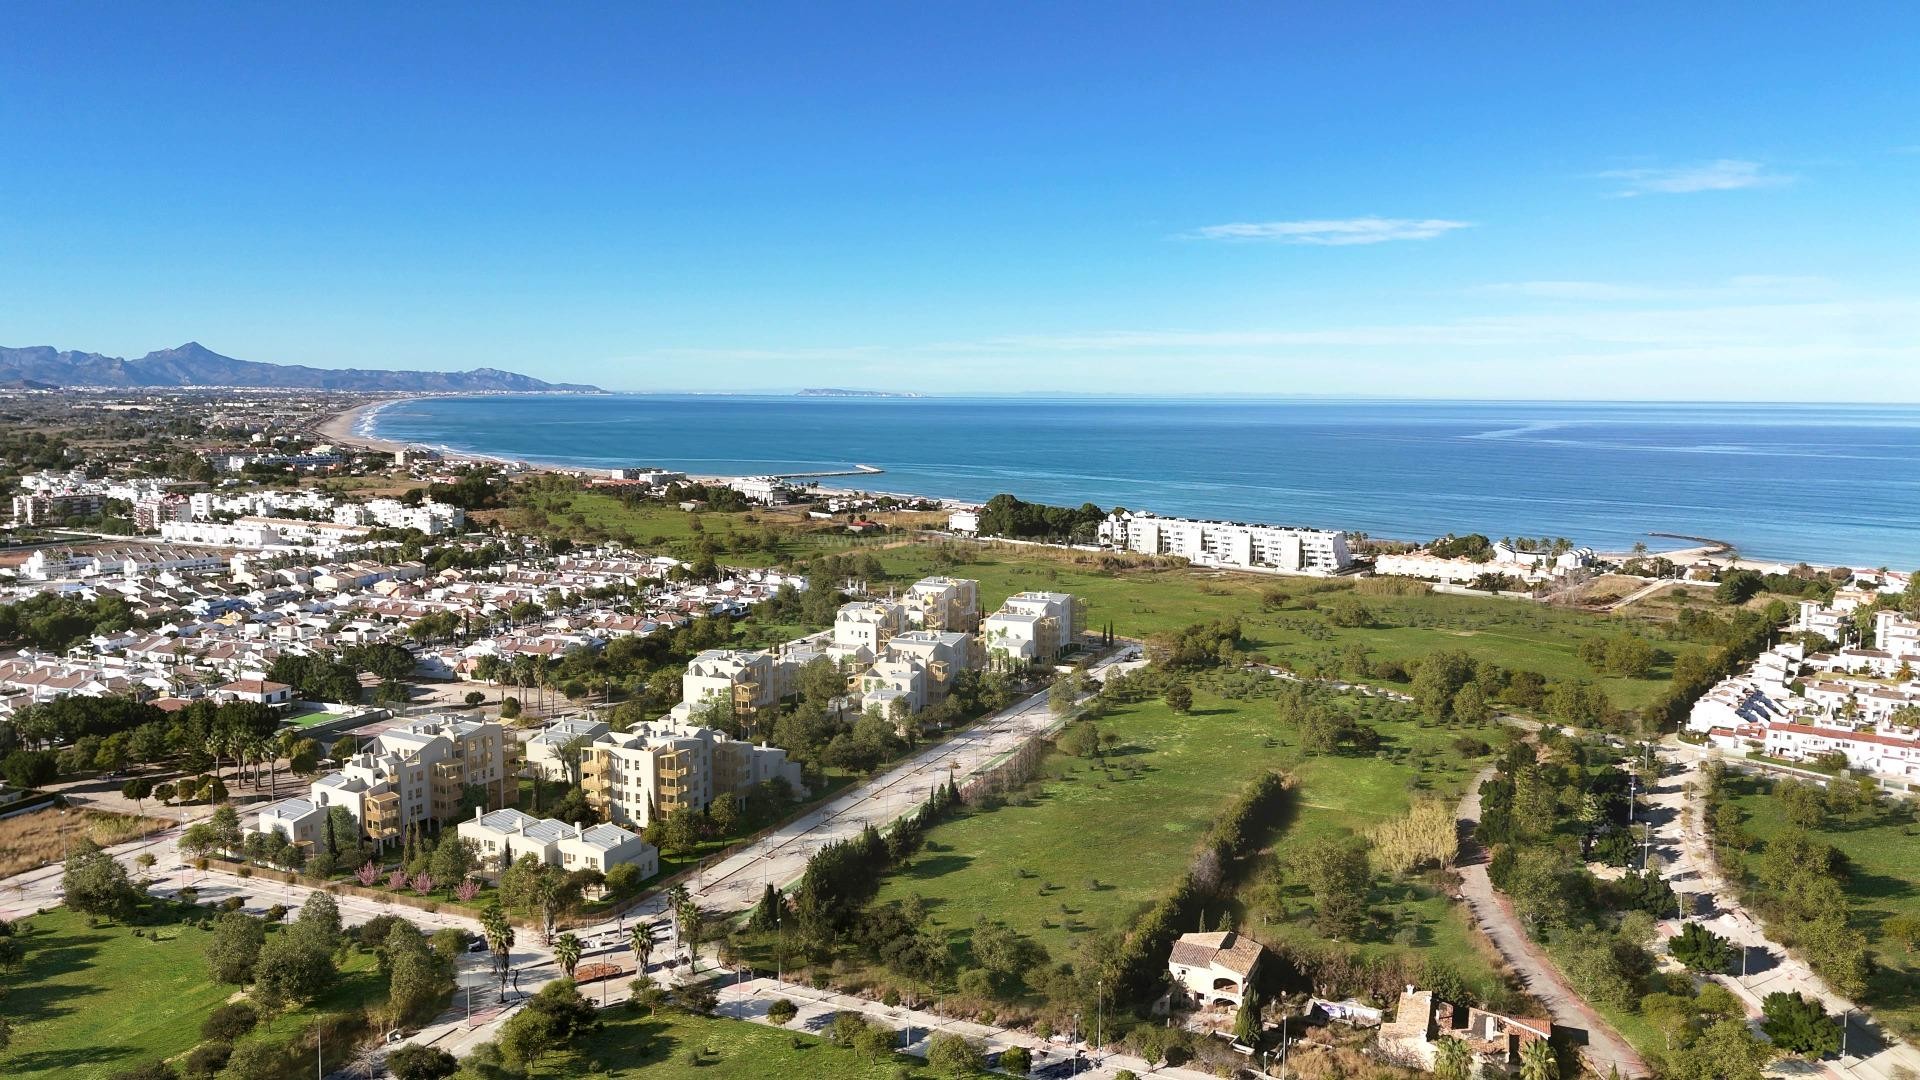 Exclusive new homes apartments/townhouses in El Vergel near Denia, 2/3 bedrooms, 2 bathrooms, each home has its own private areas, both indoor and outdoor